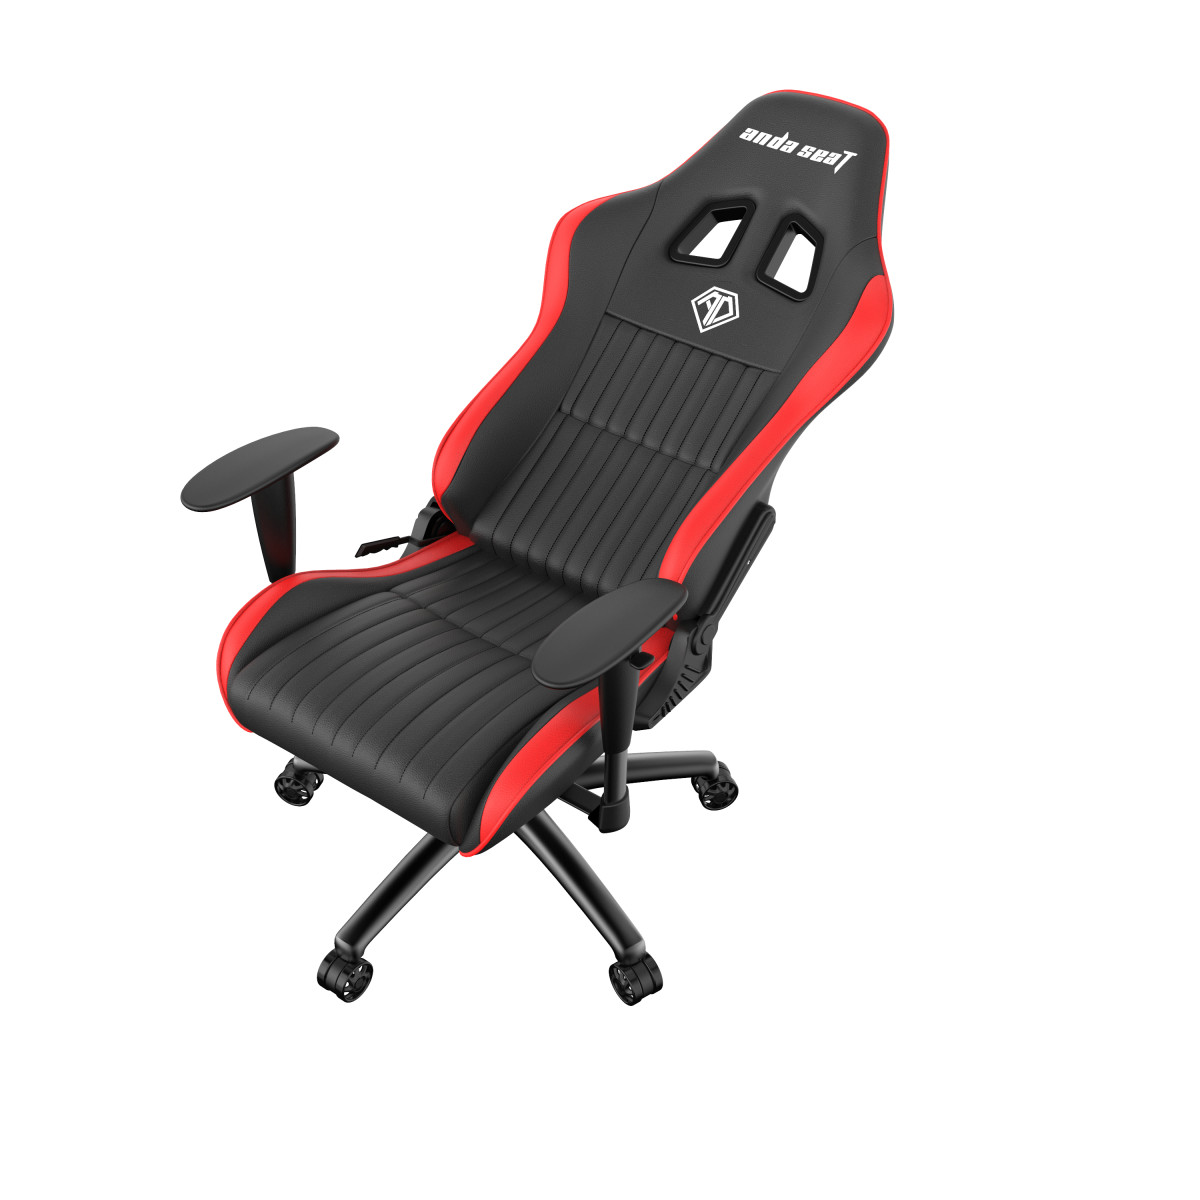 Jungle Black&Red Gaming Chair